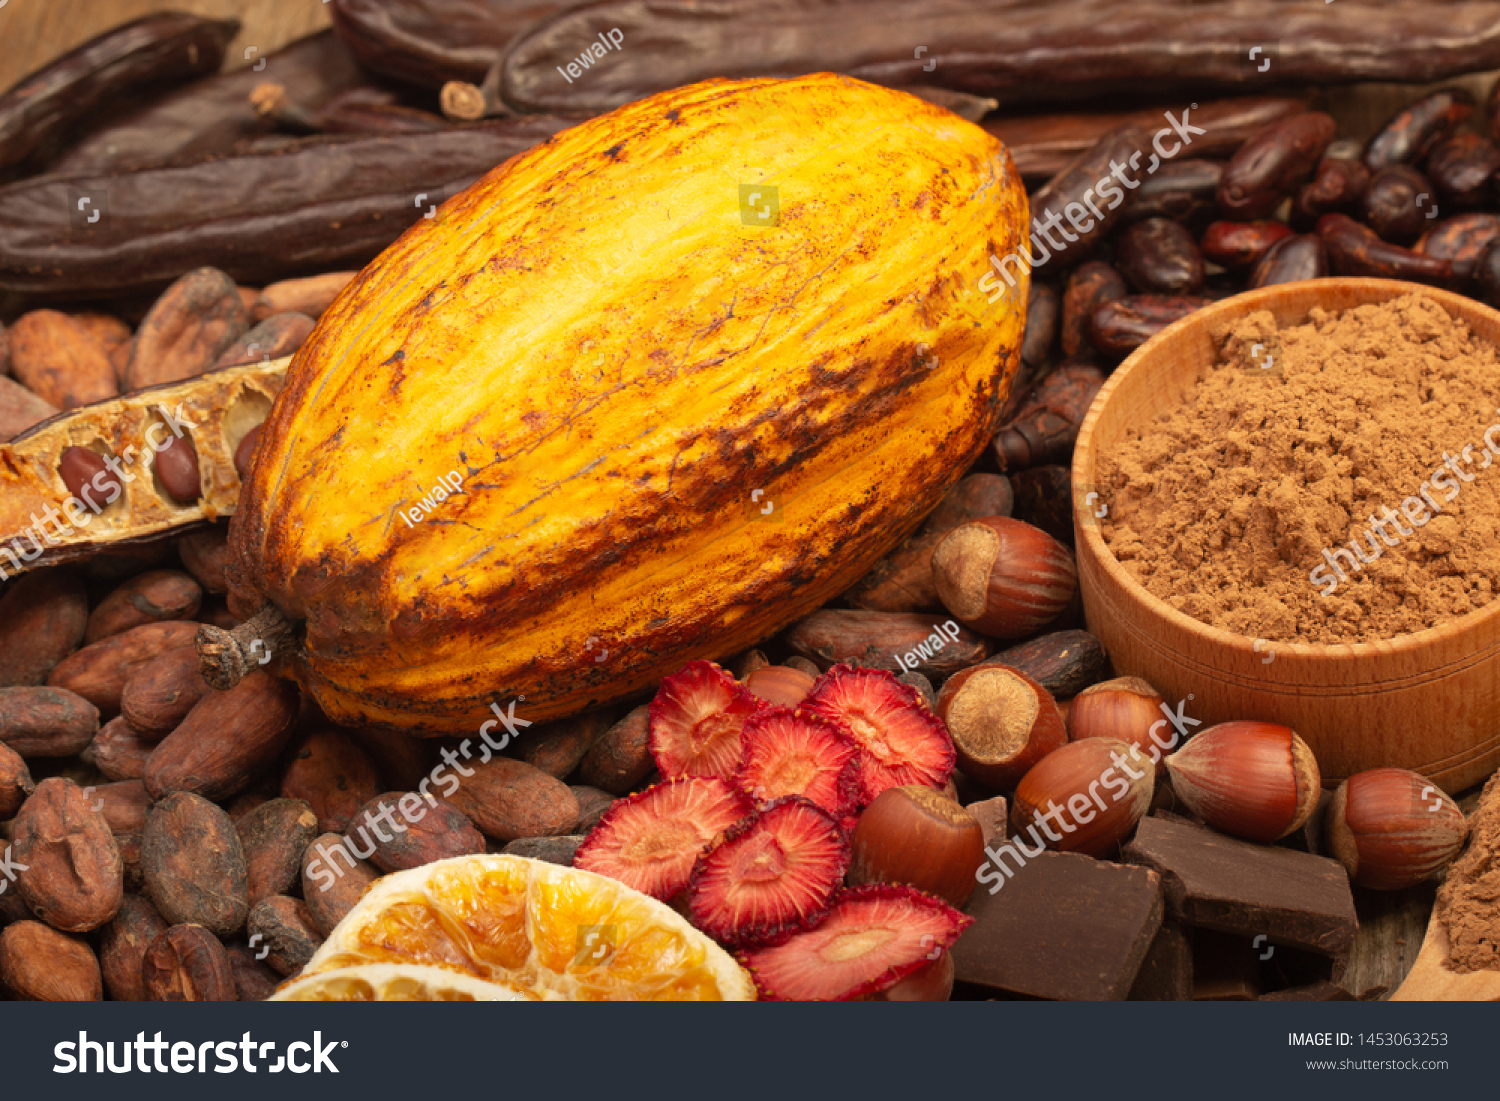 cacao pods, carob pods and dried fruits on wooden background #1453063253